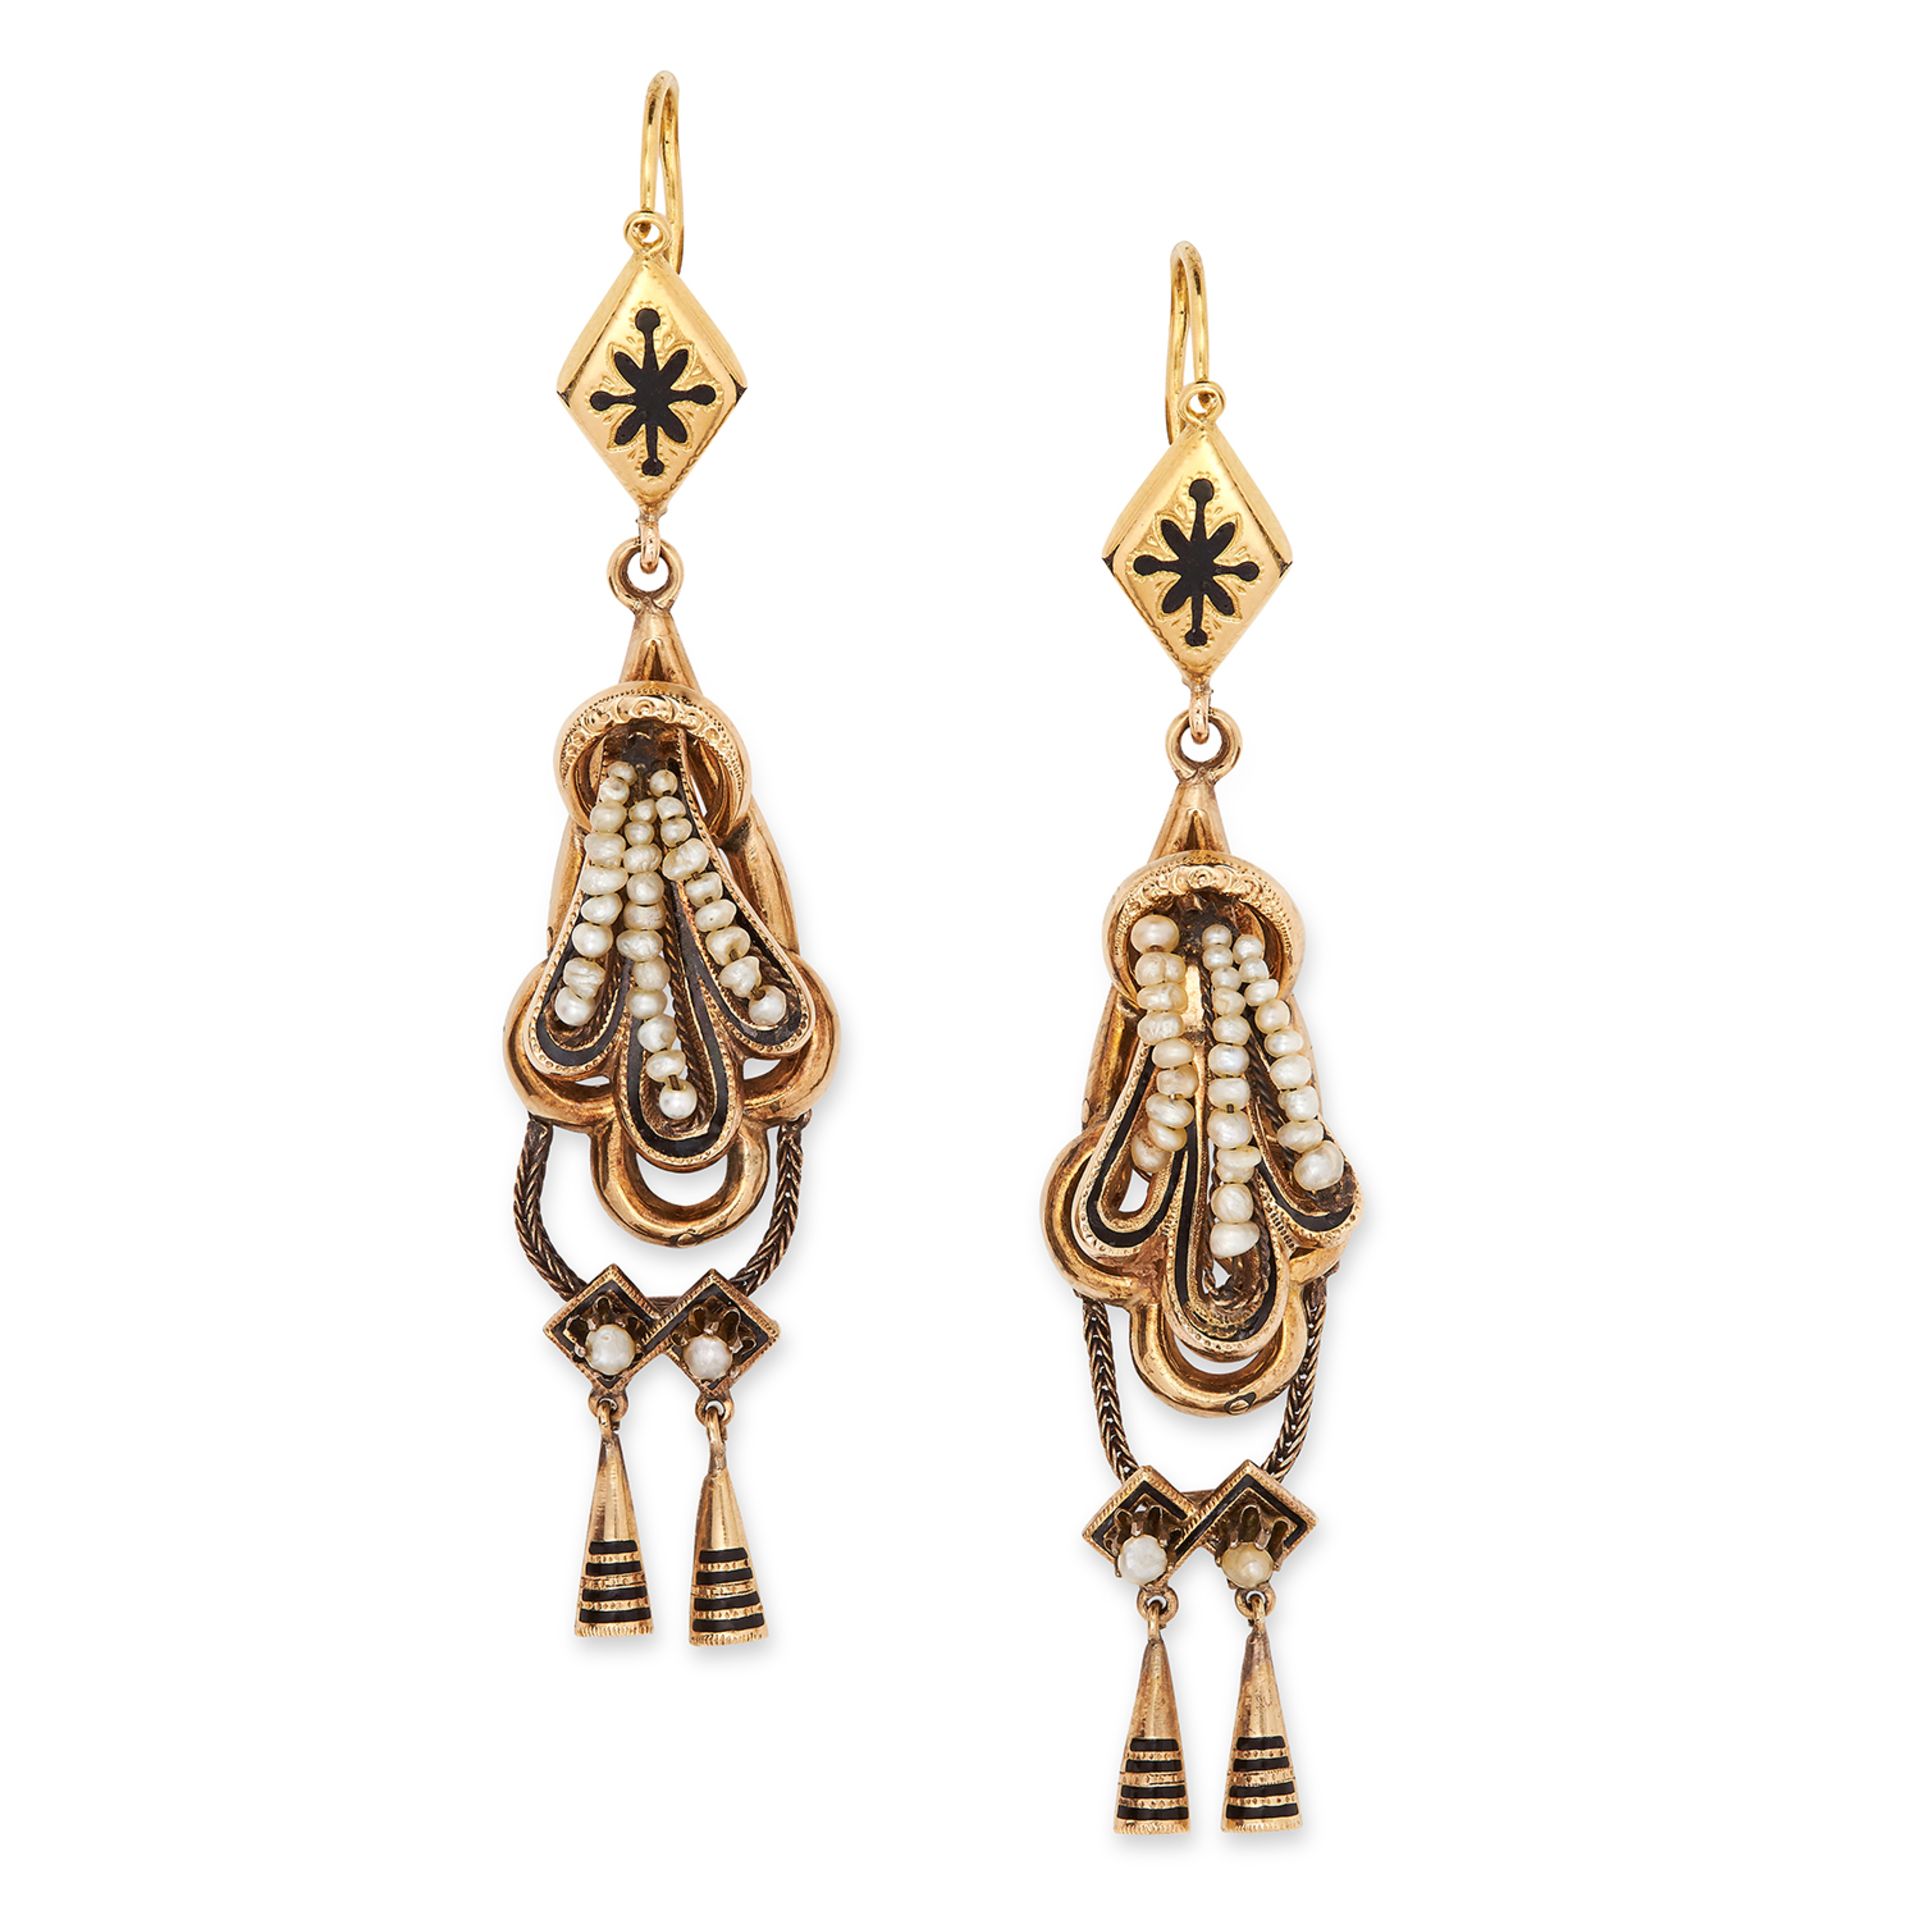 ANTIQUE PEARL AND ENAMEL DROP EARRINGS the articulated bodies set with seed pearls and black enamel,